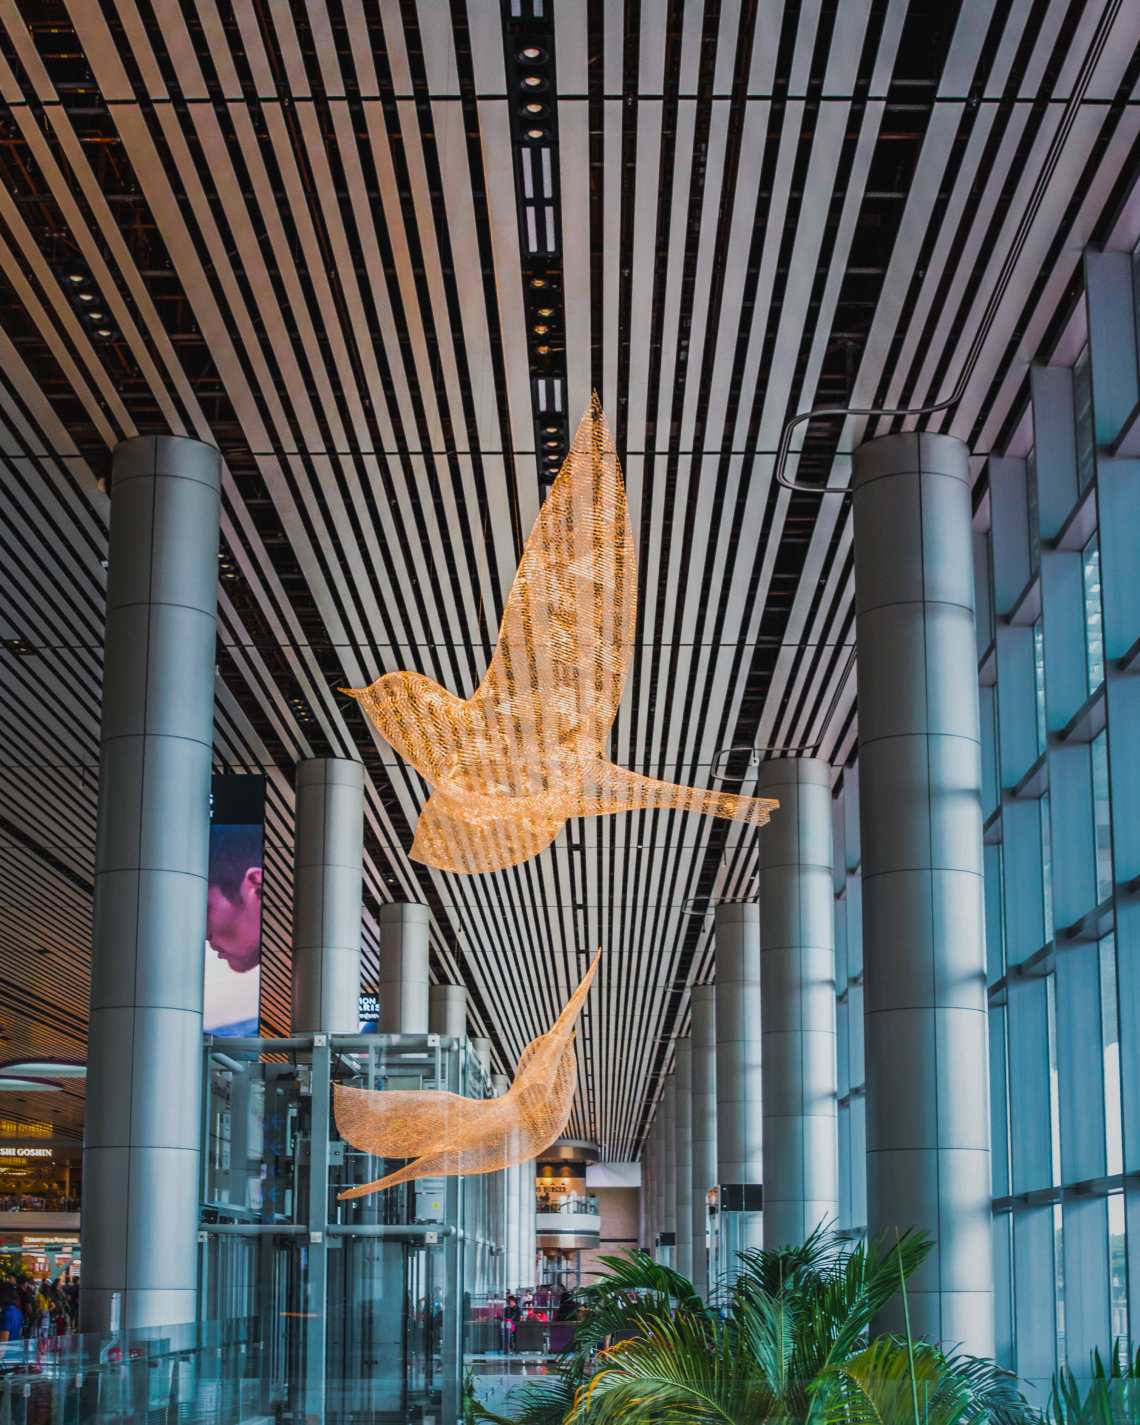 Les Oiseaux (The Birds) by Cedric Le Borgne art installation at Changi Airport’s T4 Departure and Arrival Hall 